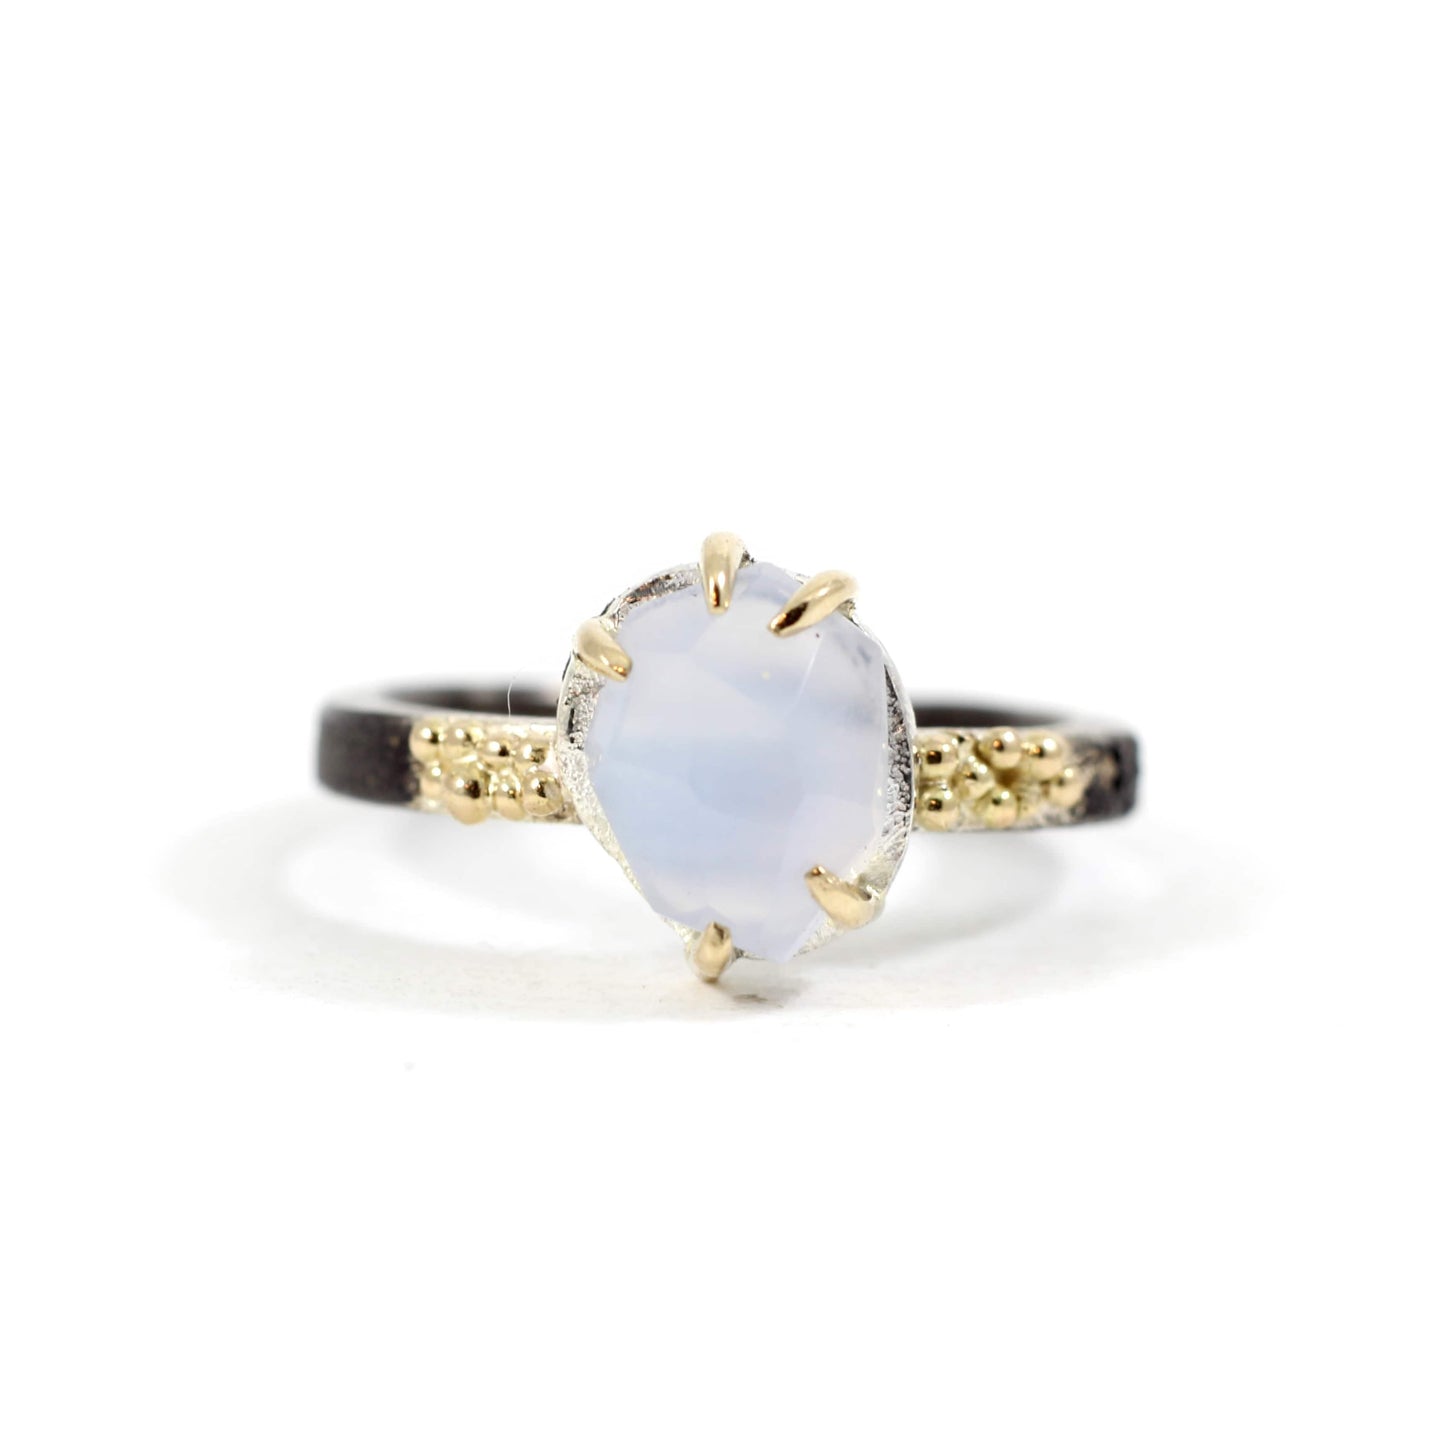 Blue Chalcedony Stone Ring